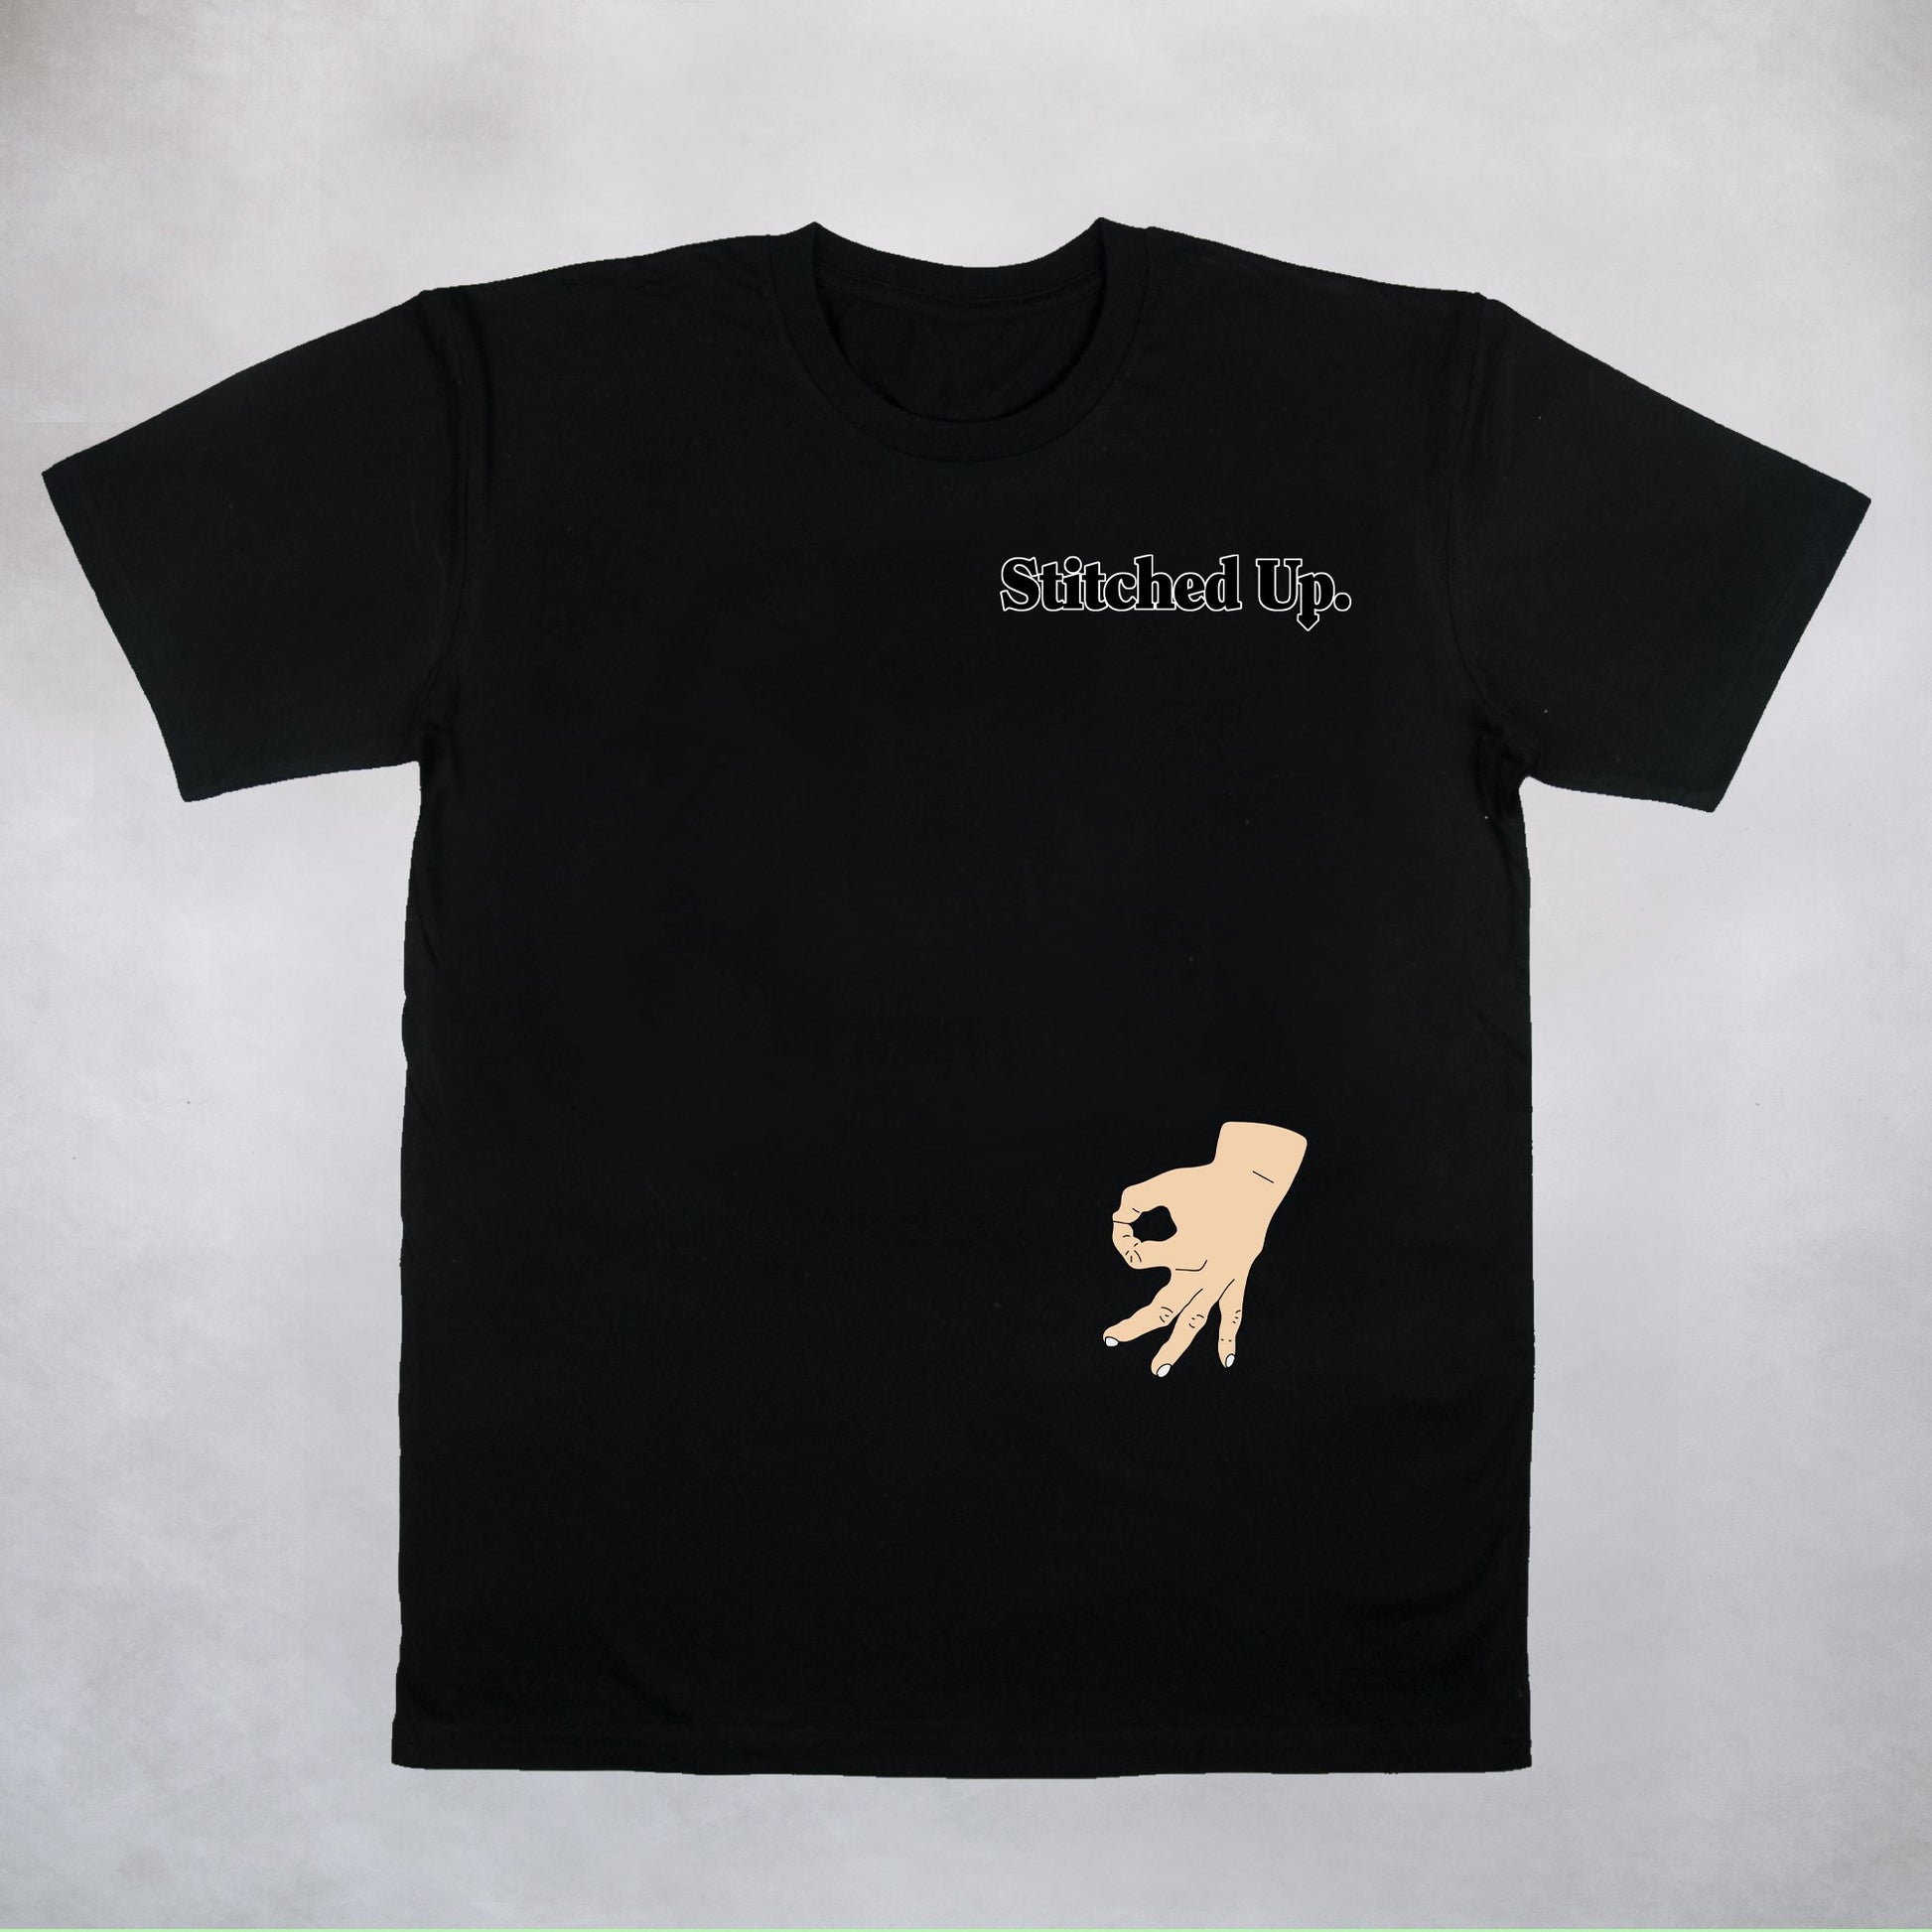 Classy Duds Short Sleeve T-Shirts S / Black / Standard Stitched Up Tee